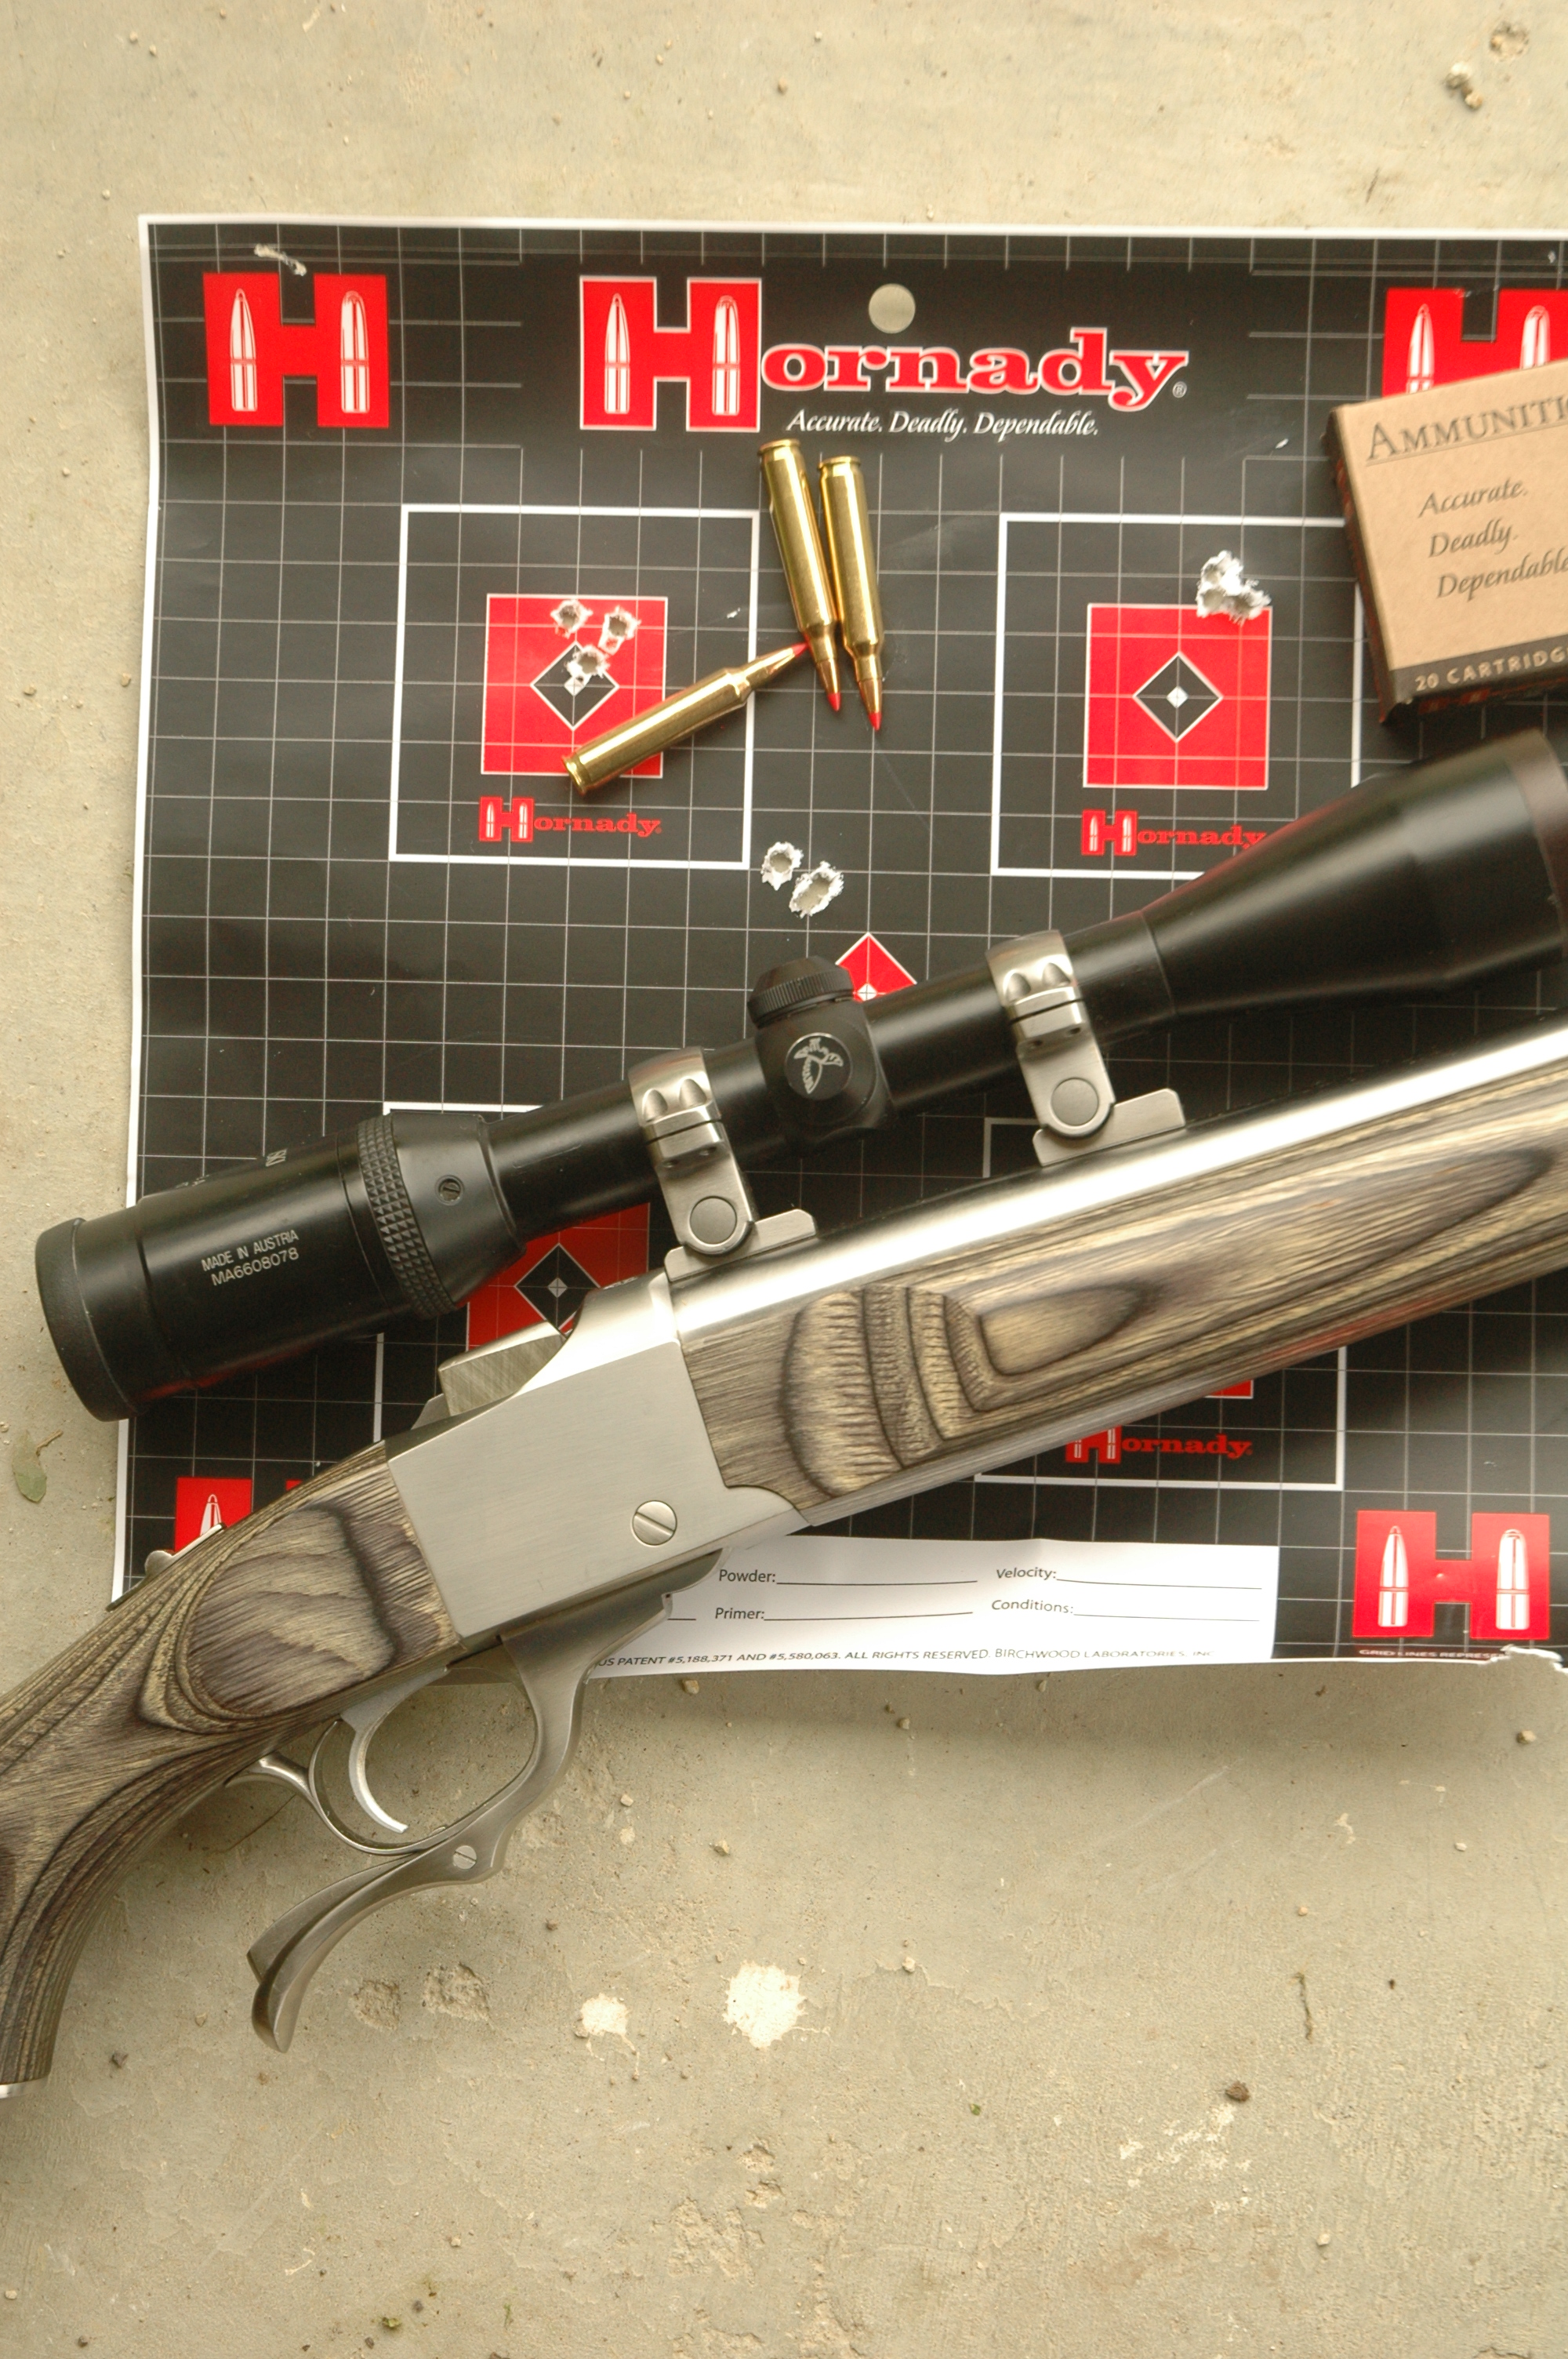 The Ruger No. 1 isn’t known for tack-driving accuracy, but heavy-barreled models are often surprising. This is Boddington’s favorite varmint rifle, a stainless-and-laminate No. 1 in .204, a genuine half-MOA rifle.